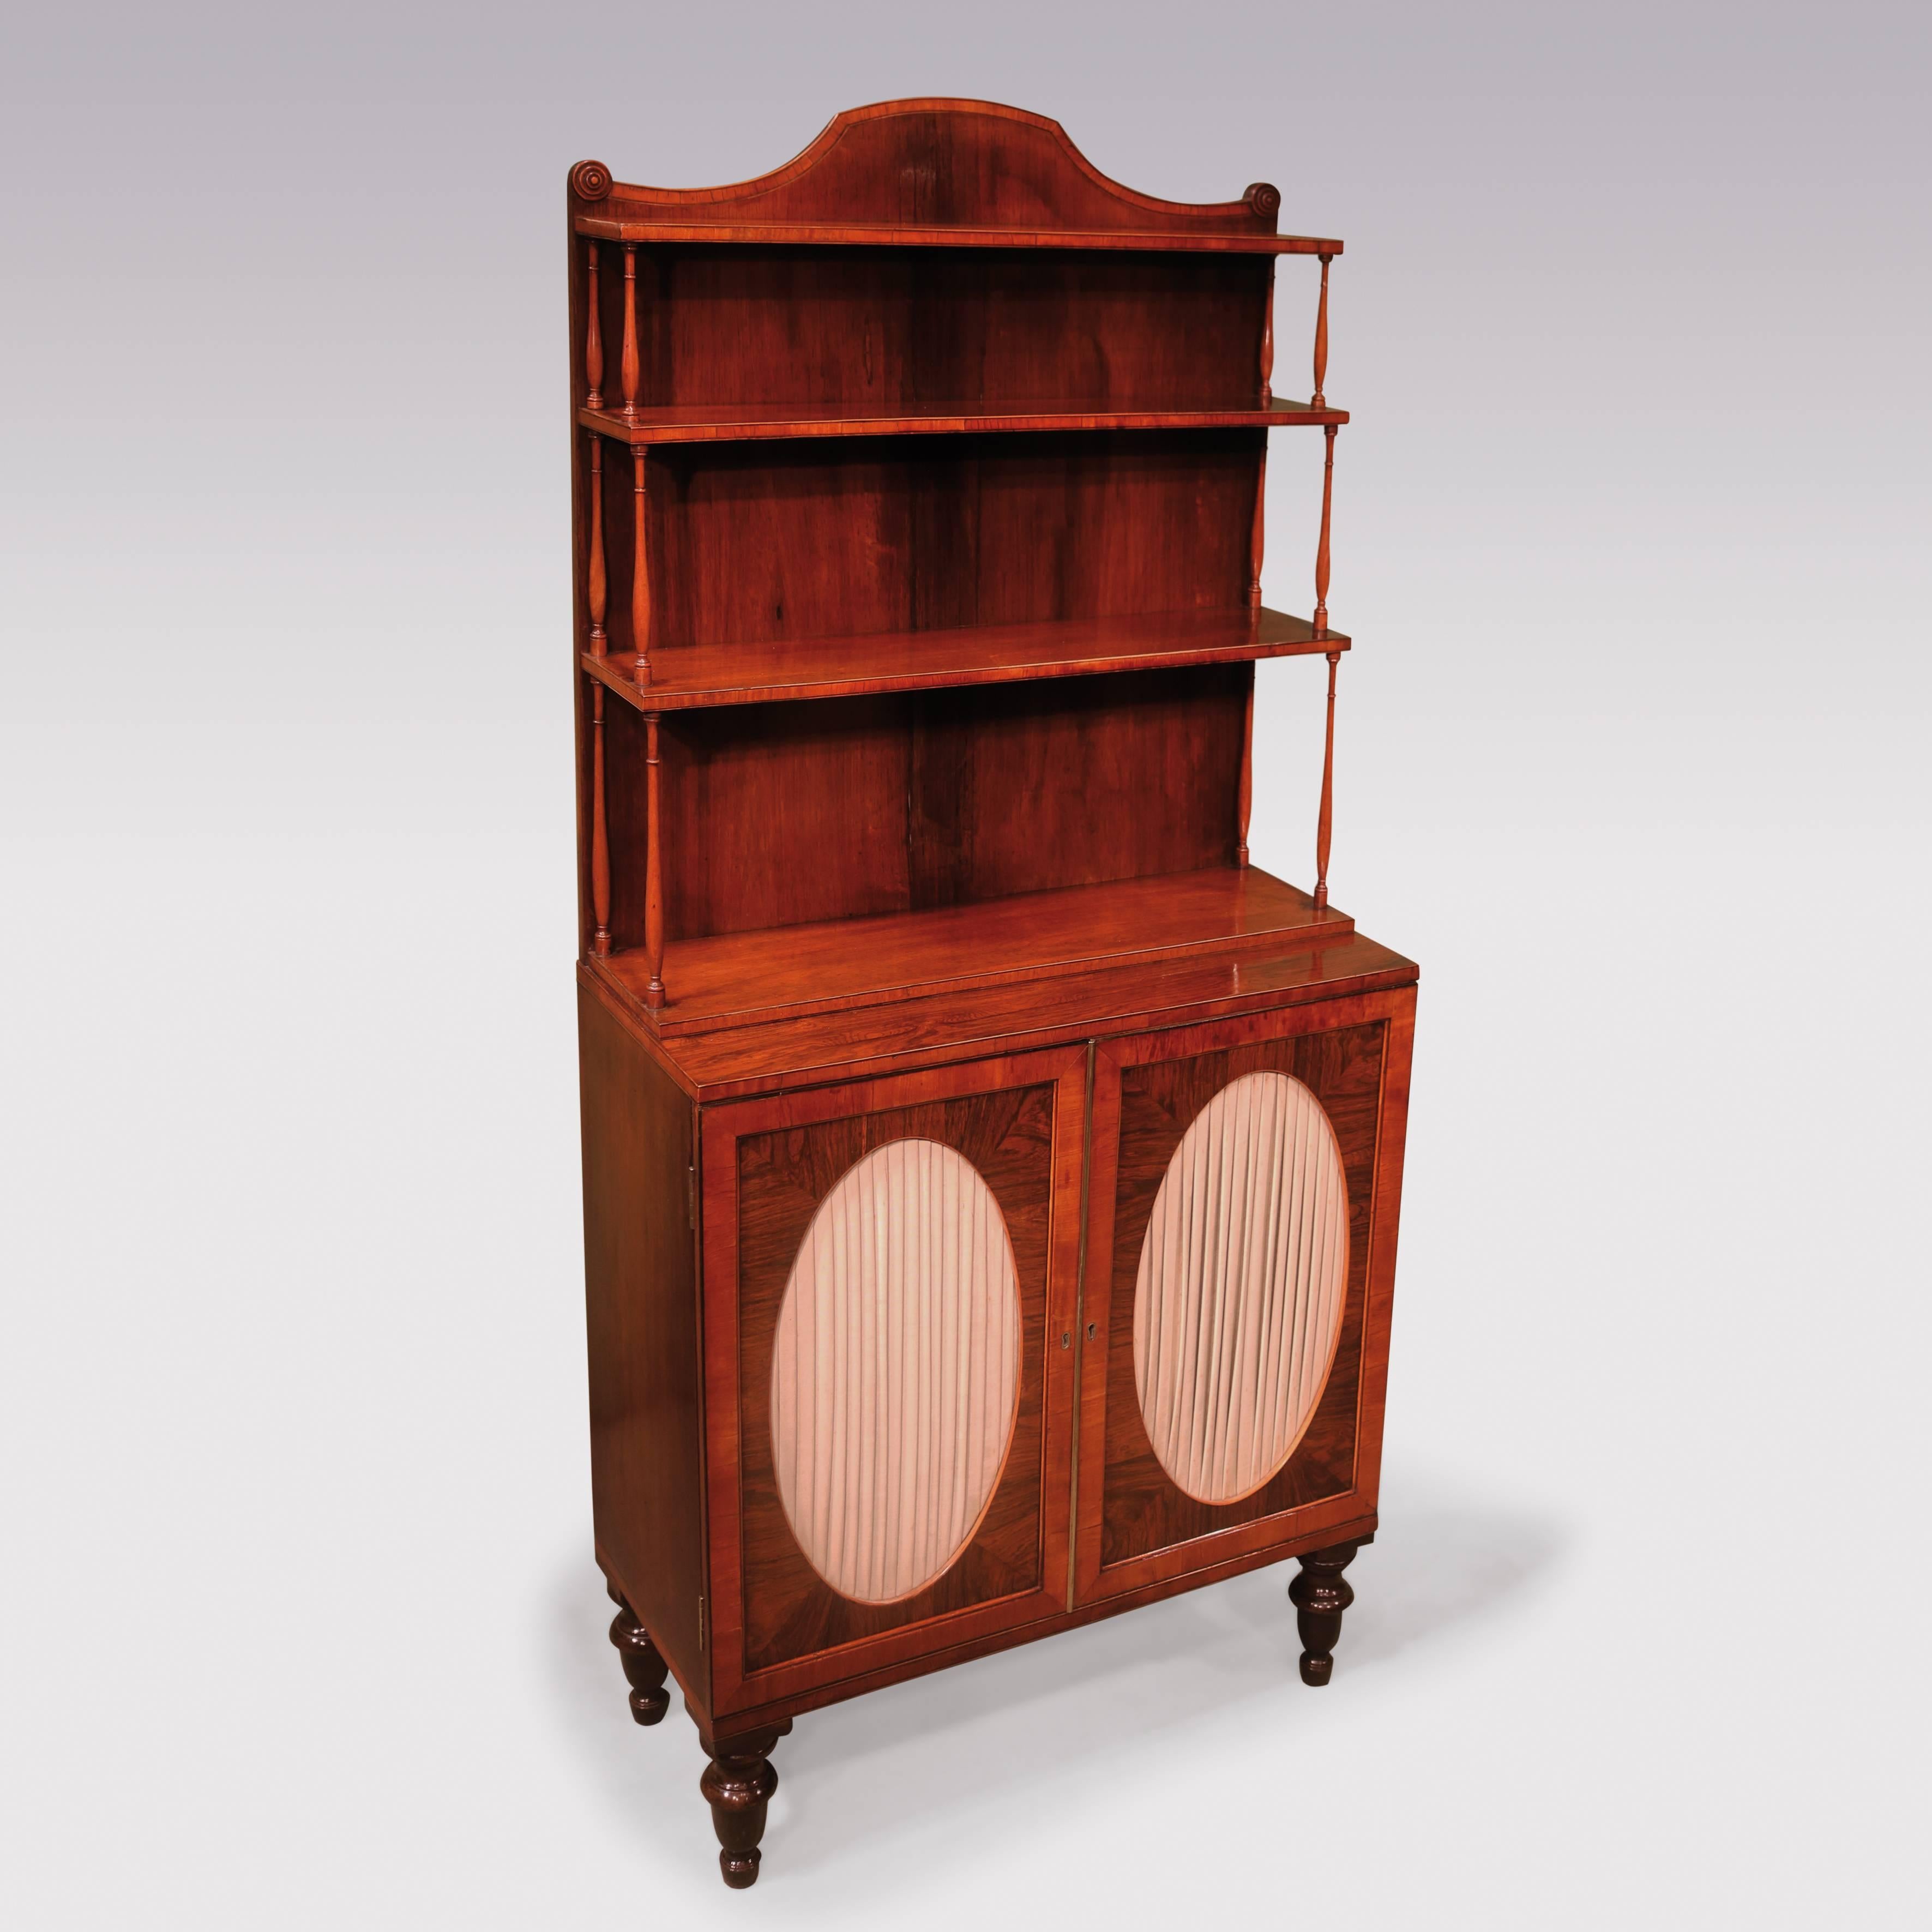 A fine quality pair of early 19th century Regency period rosewood 2-door cabinets, boxwood and ebony strung throughout, with satinwood banded and spindle turned upper parts having shaped tops flanked by roundels. The cabinets differing in width by 4